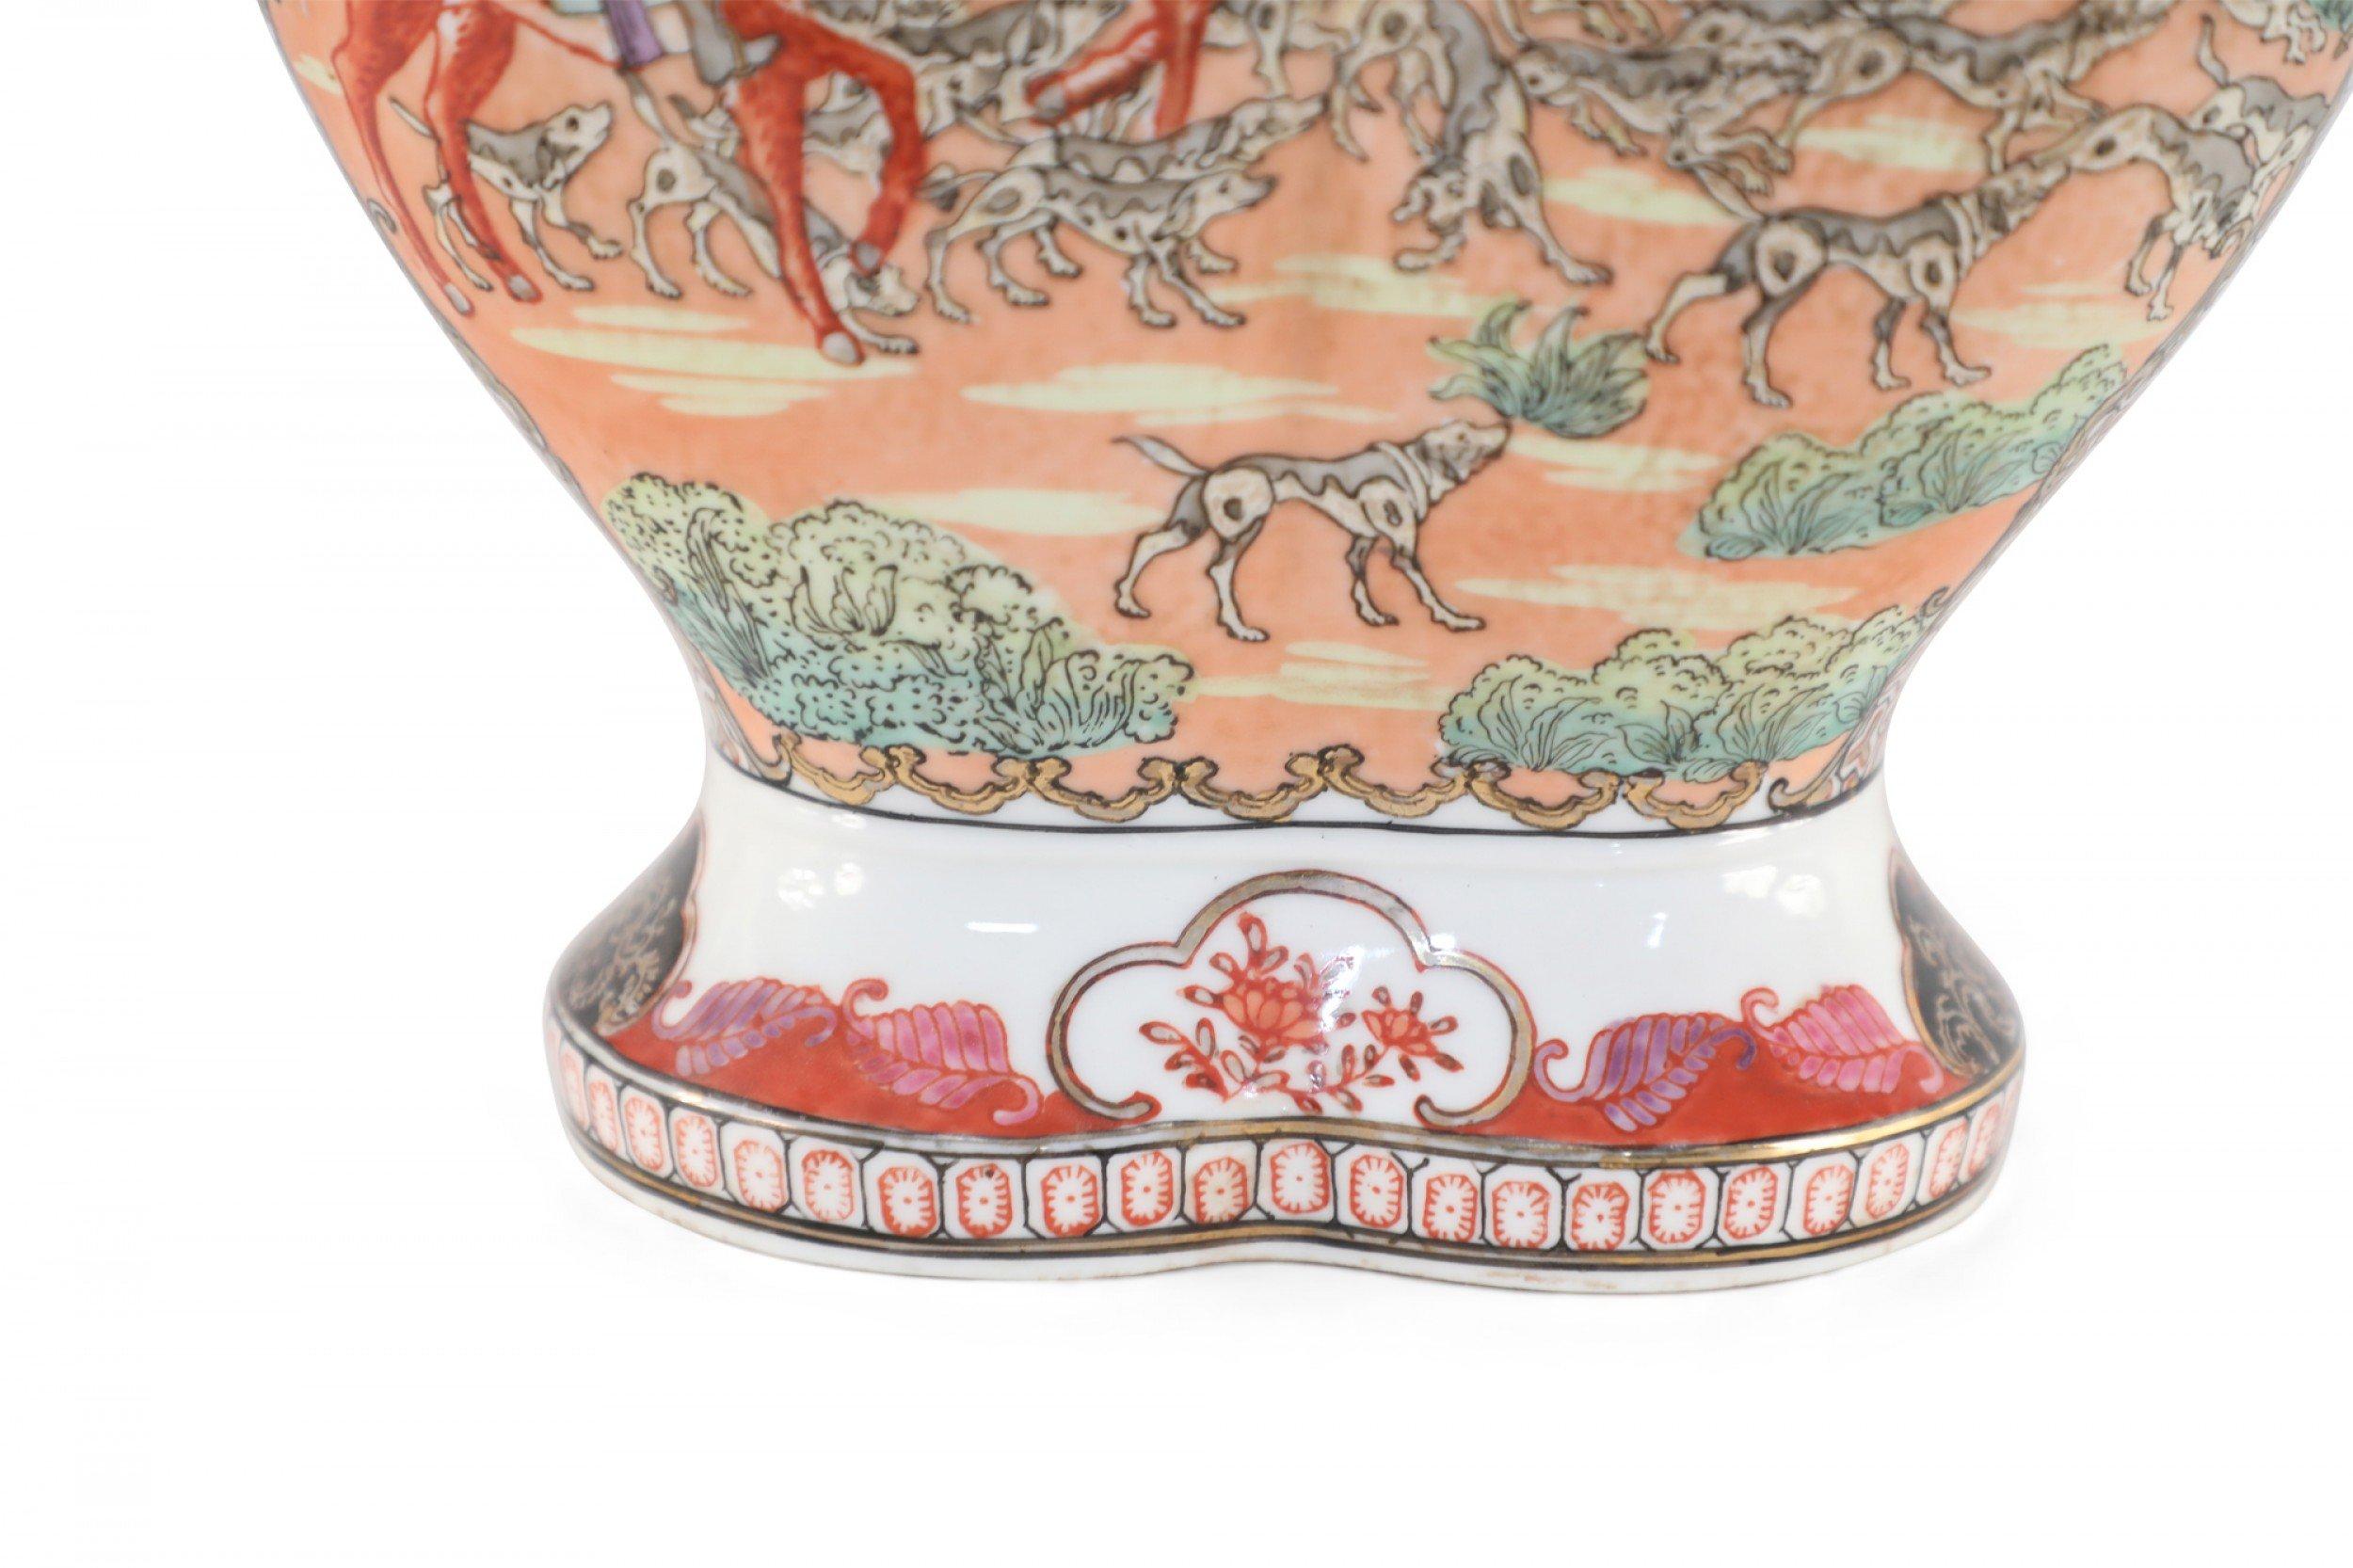 Antique Chinese (Early 20th Century) Guangzhou painted export porcelain vase with a conjoined form depicting a richly colored dog hunt scene between gold-patterned bands.
 